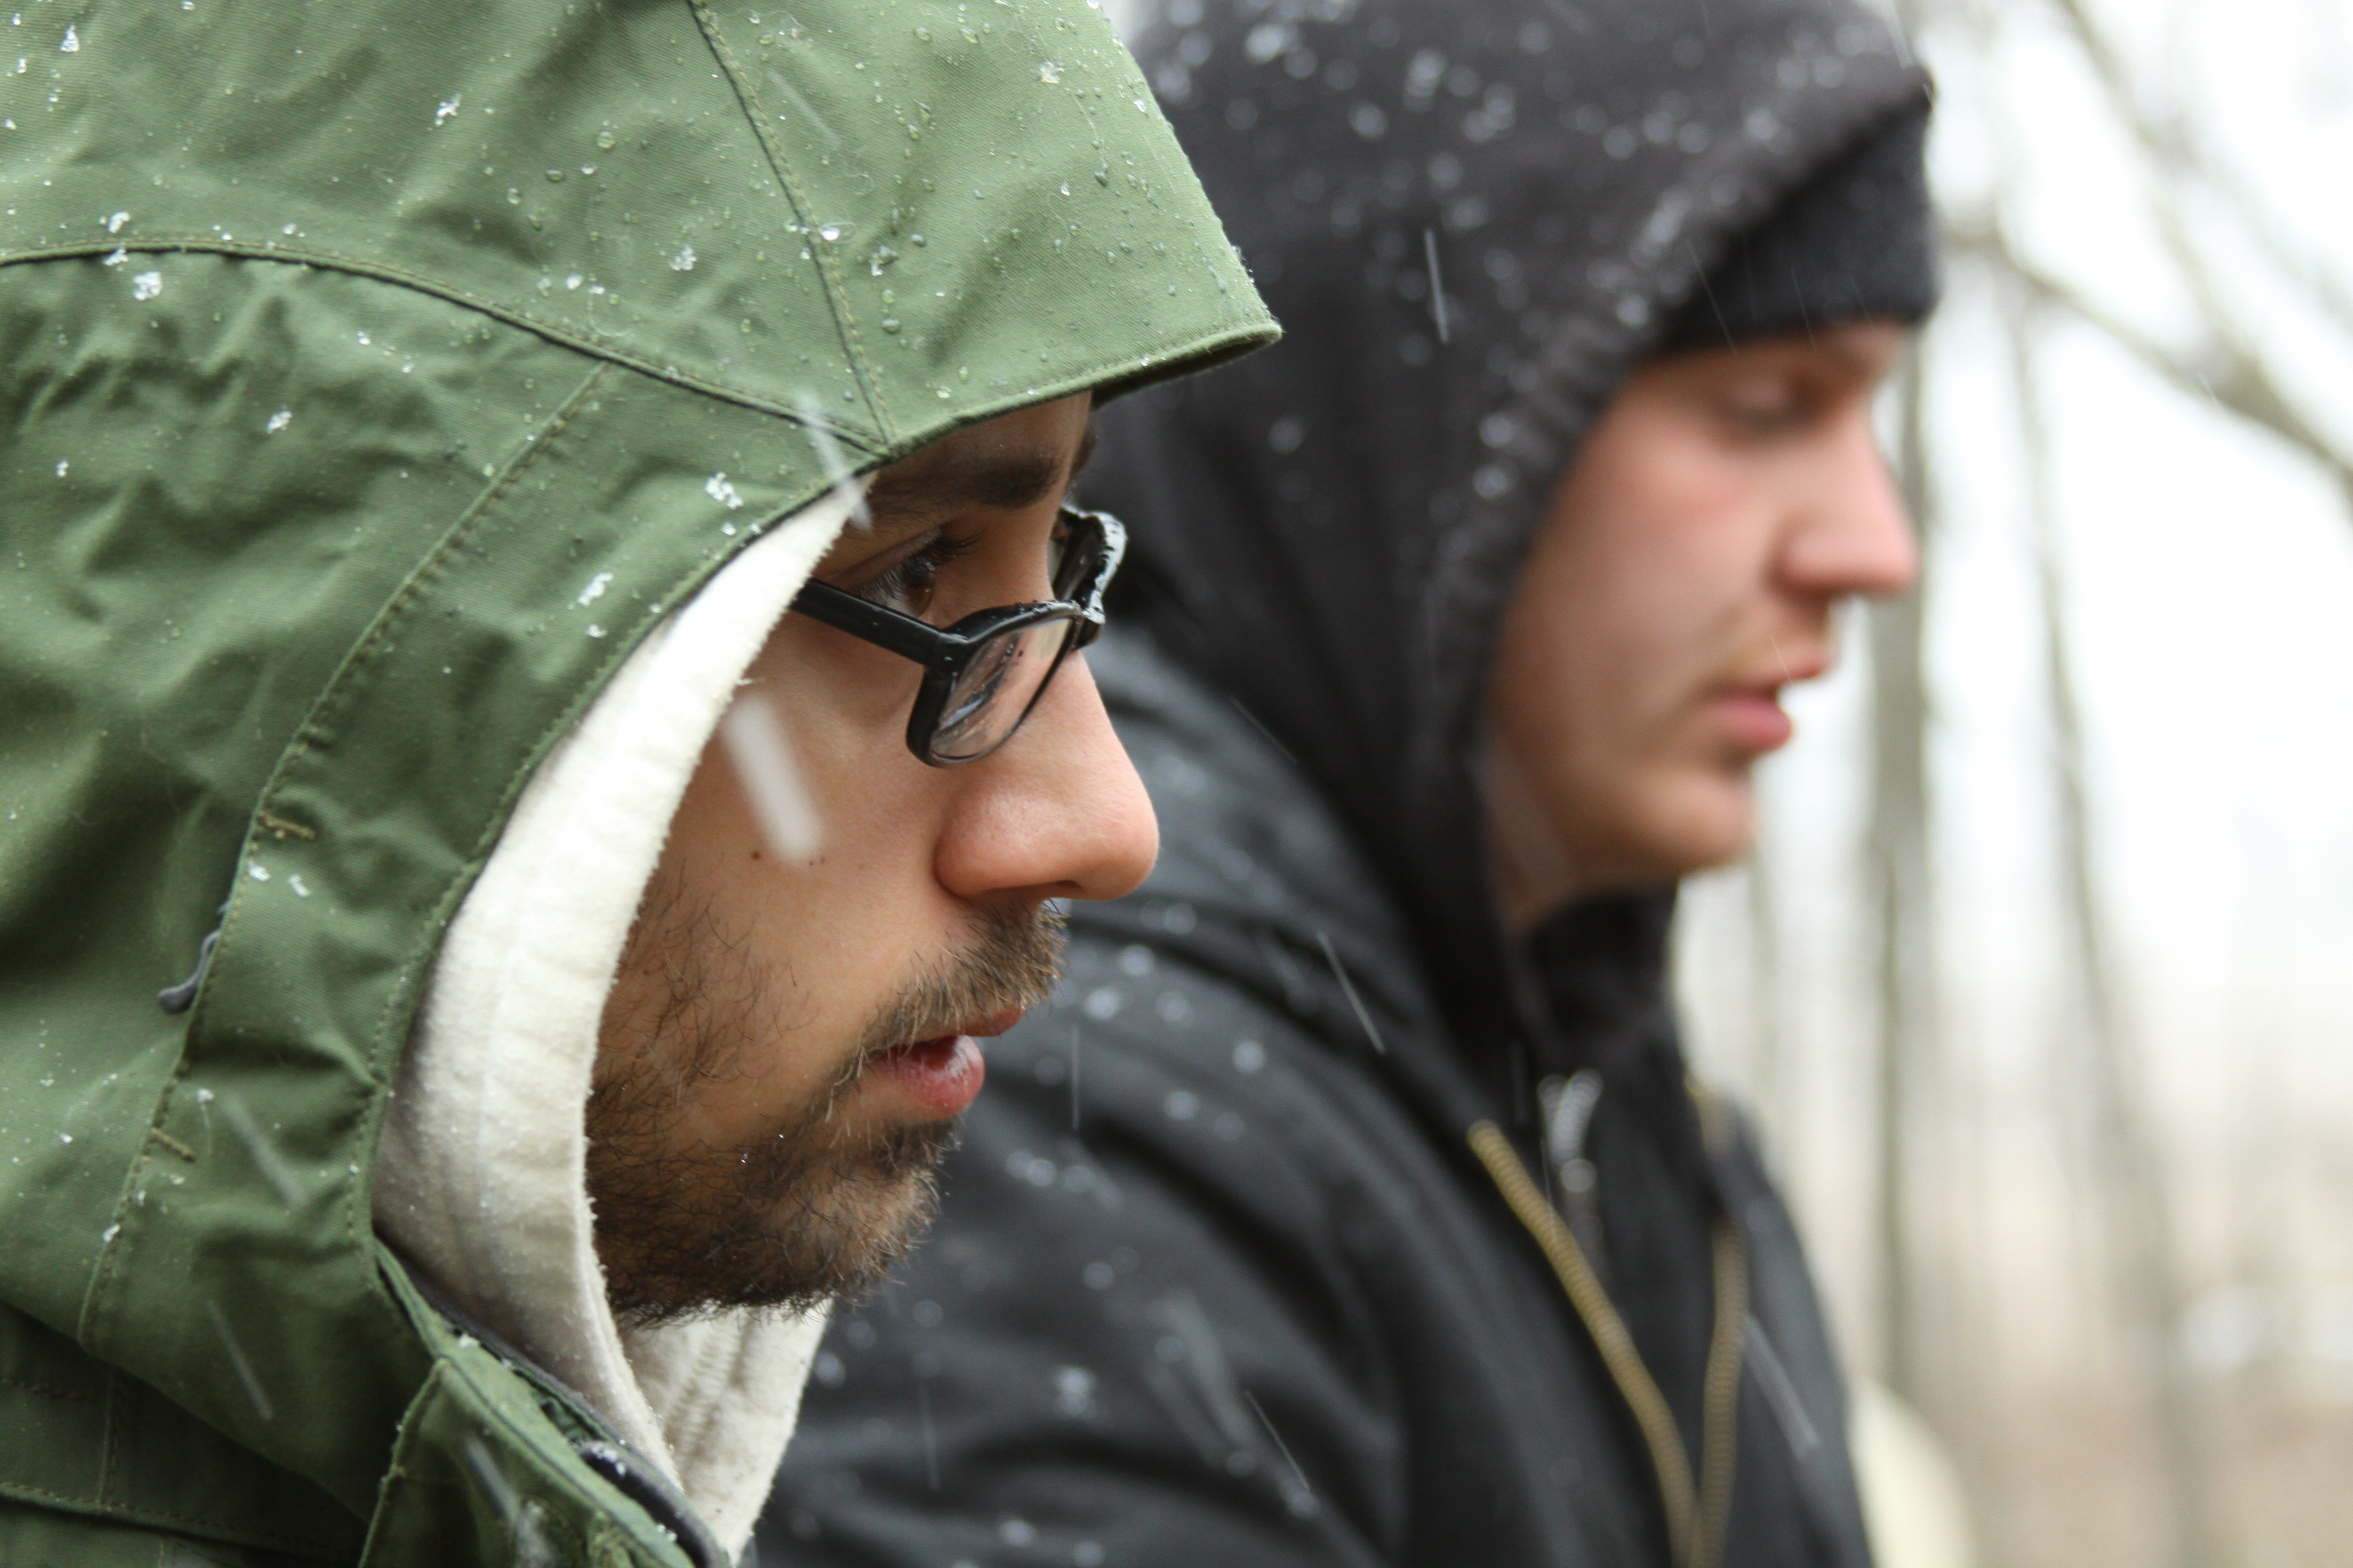 Co-writers/co-directors Adam Bartlett and John Pata attempt to mentally prepare to film in an oncoming blizzard.